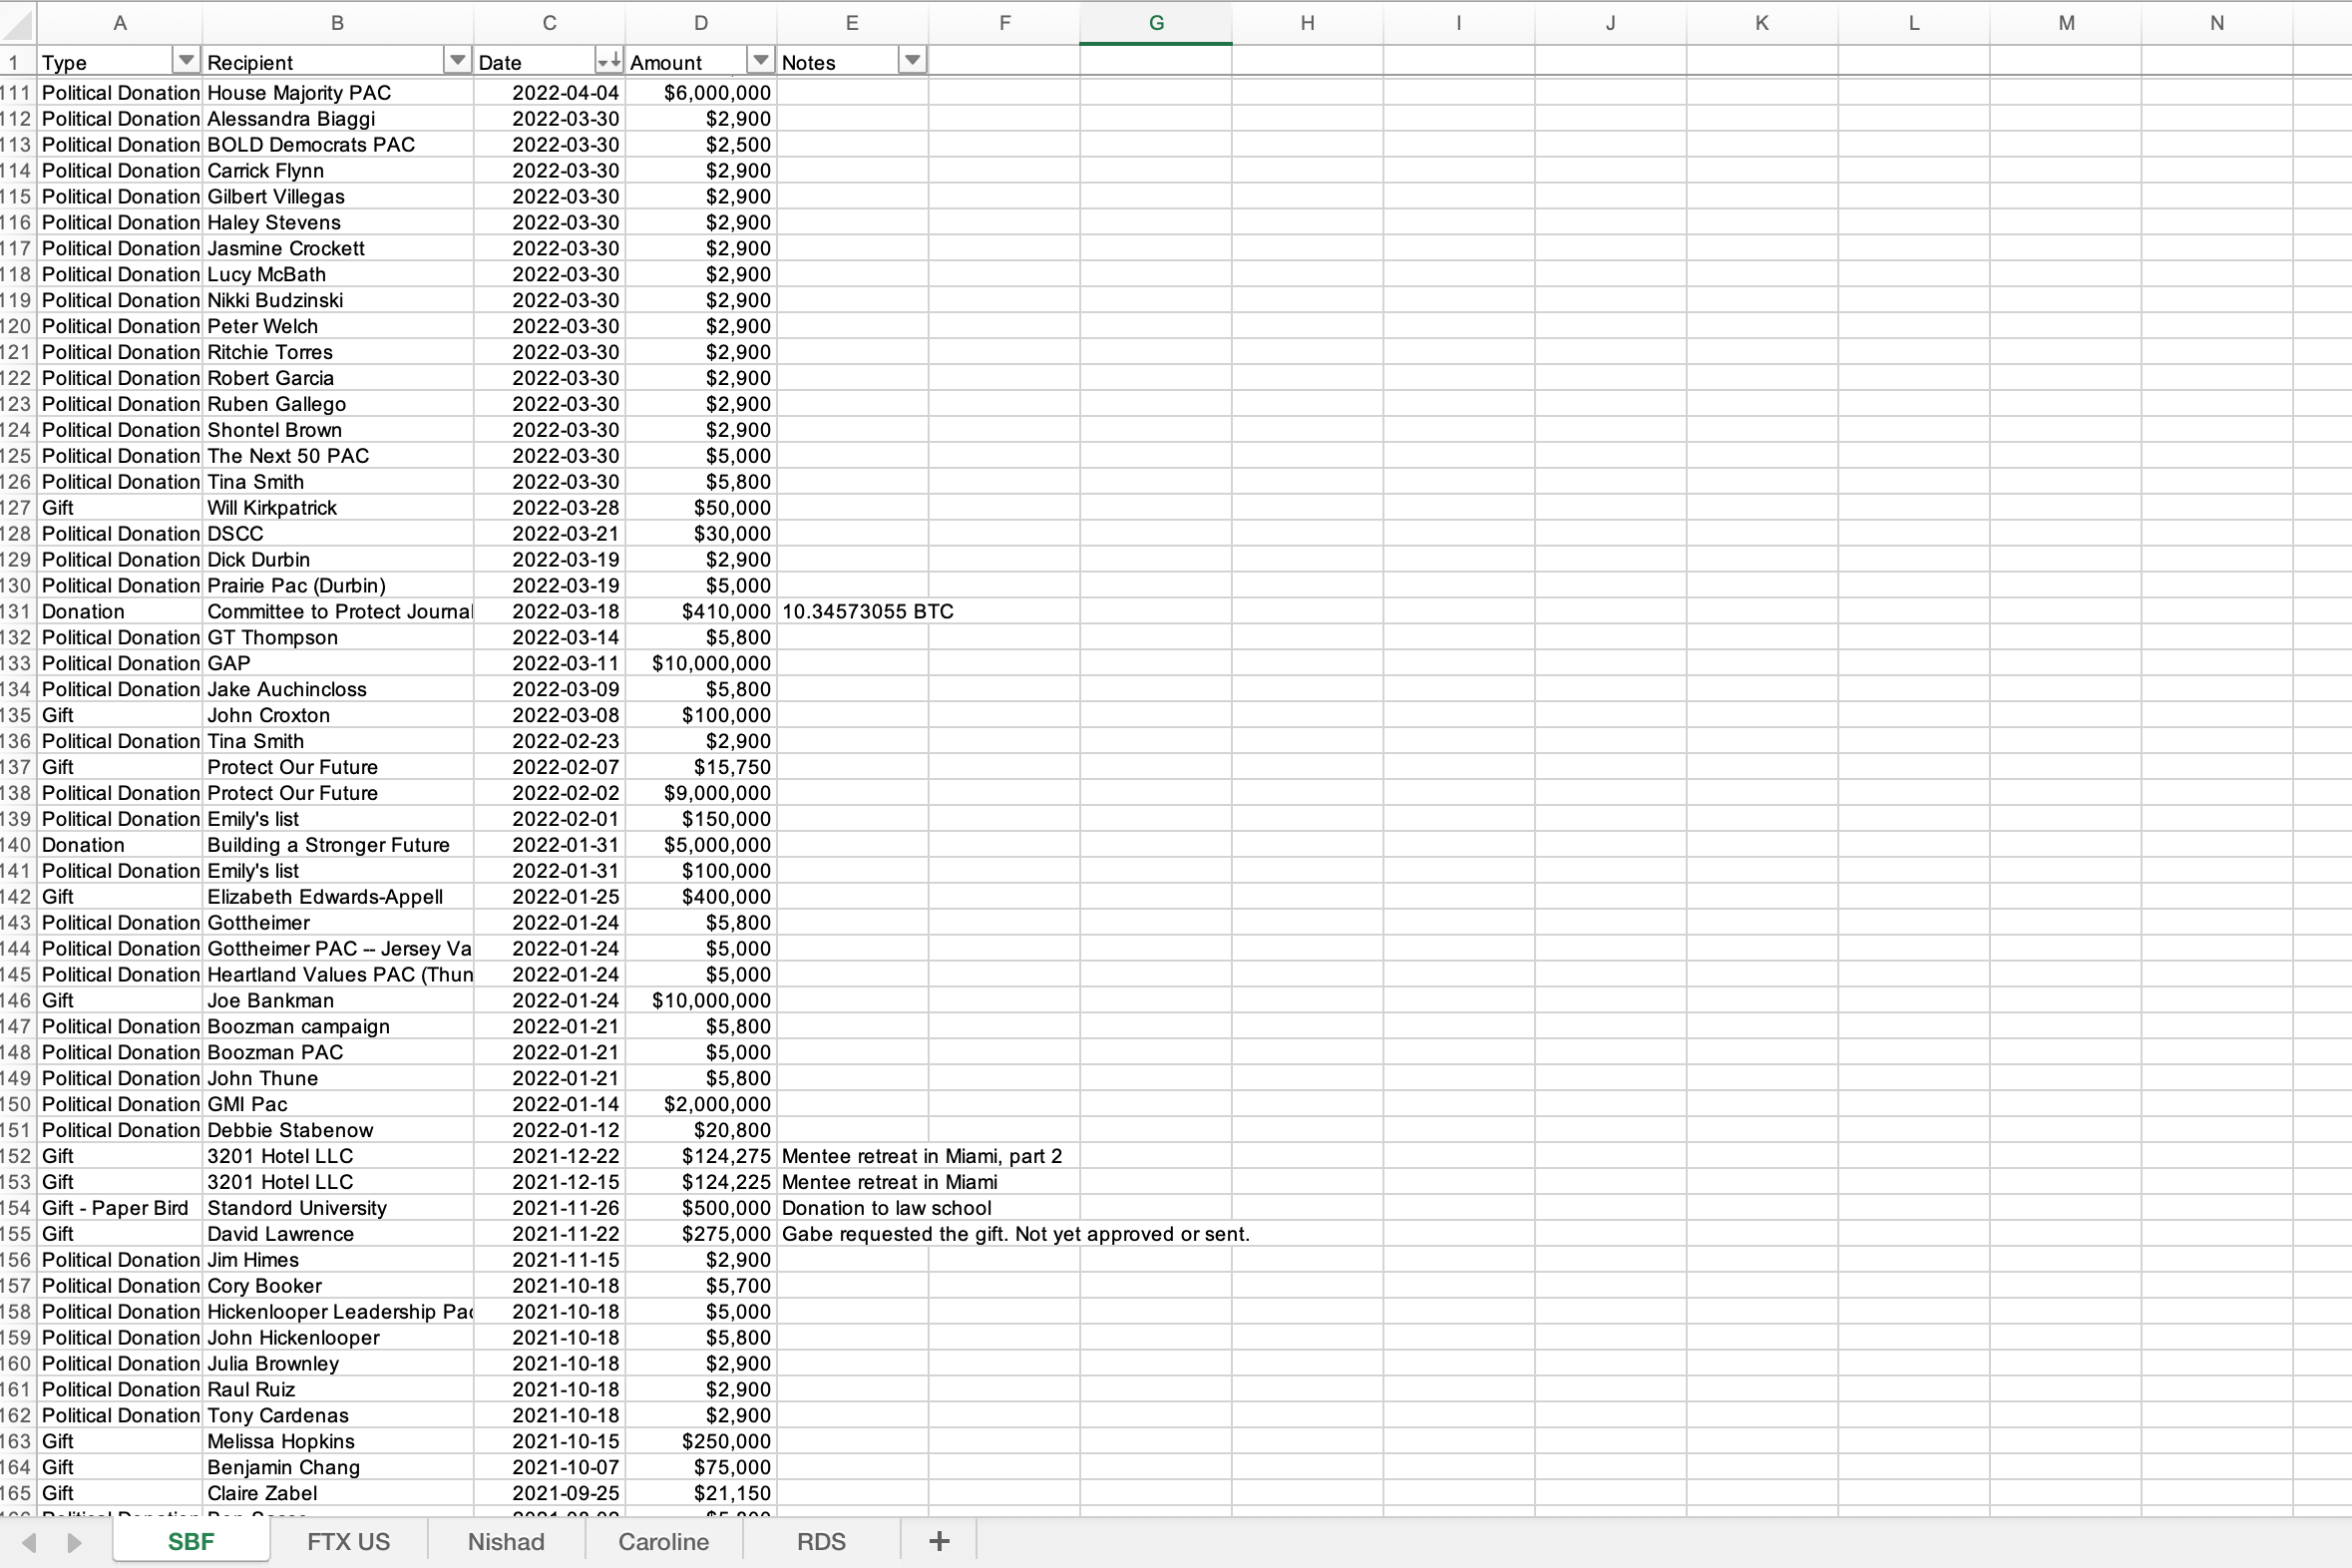 A portion of an Excel spreadsheet displaying SBF’s monetary gifts and donations from Sept. 25, 2021, through April 4, 2022, including recipients like Claire Zabel, Melissa Hopkins, GMI PAC, Elizabeth Edwards-Appell, Protect Our Future, Guarding Against Pandemics, Will Kirkpatrick, the Next 50 PAC, Carrick Flynn, and the House Majority PAC, among others